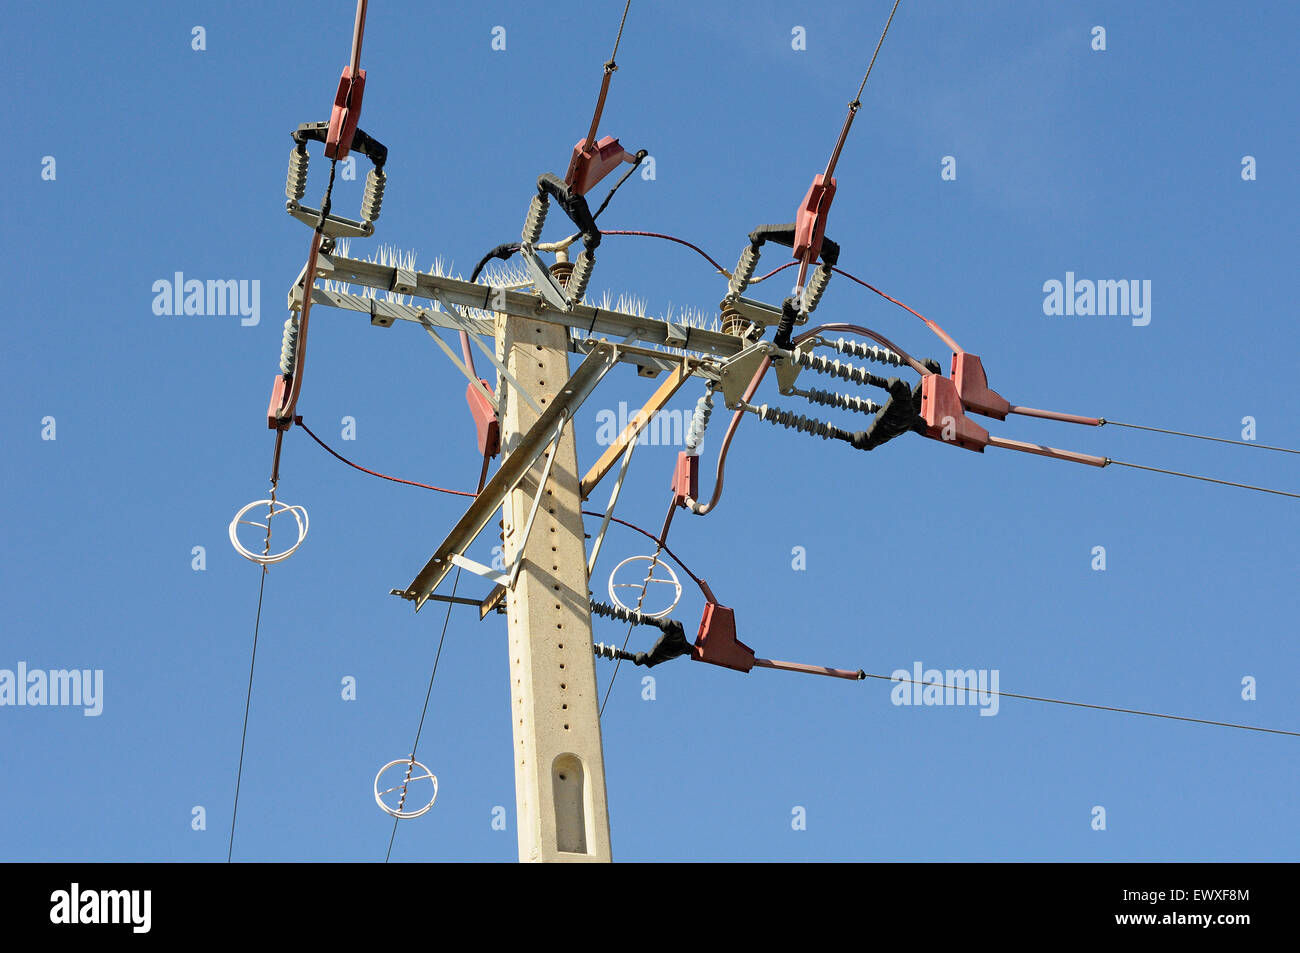 Electrical tower with cables with bird flight diverters to prevent birds being electrocuted. Stock Photo